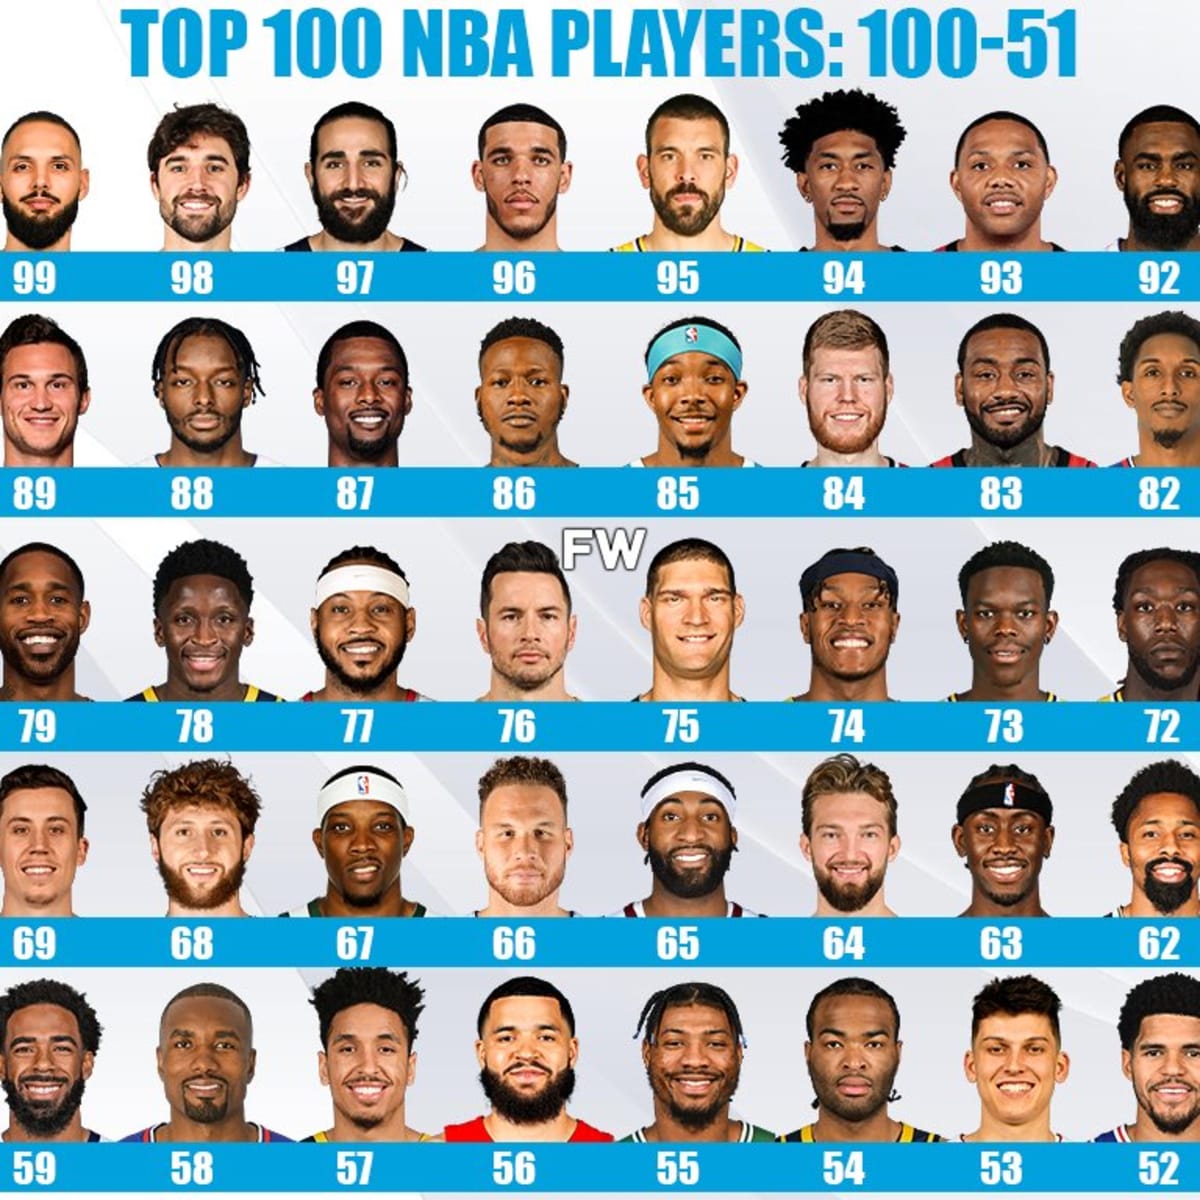 Top 100 All-Time Players